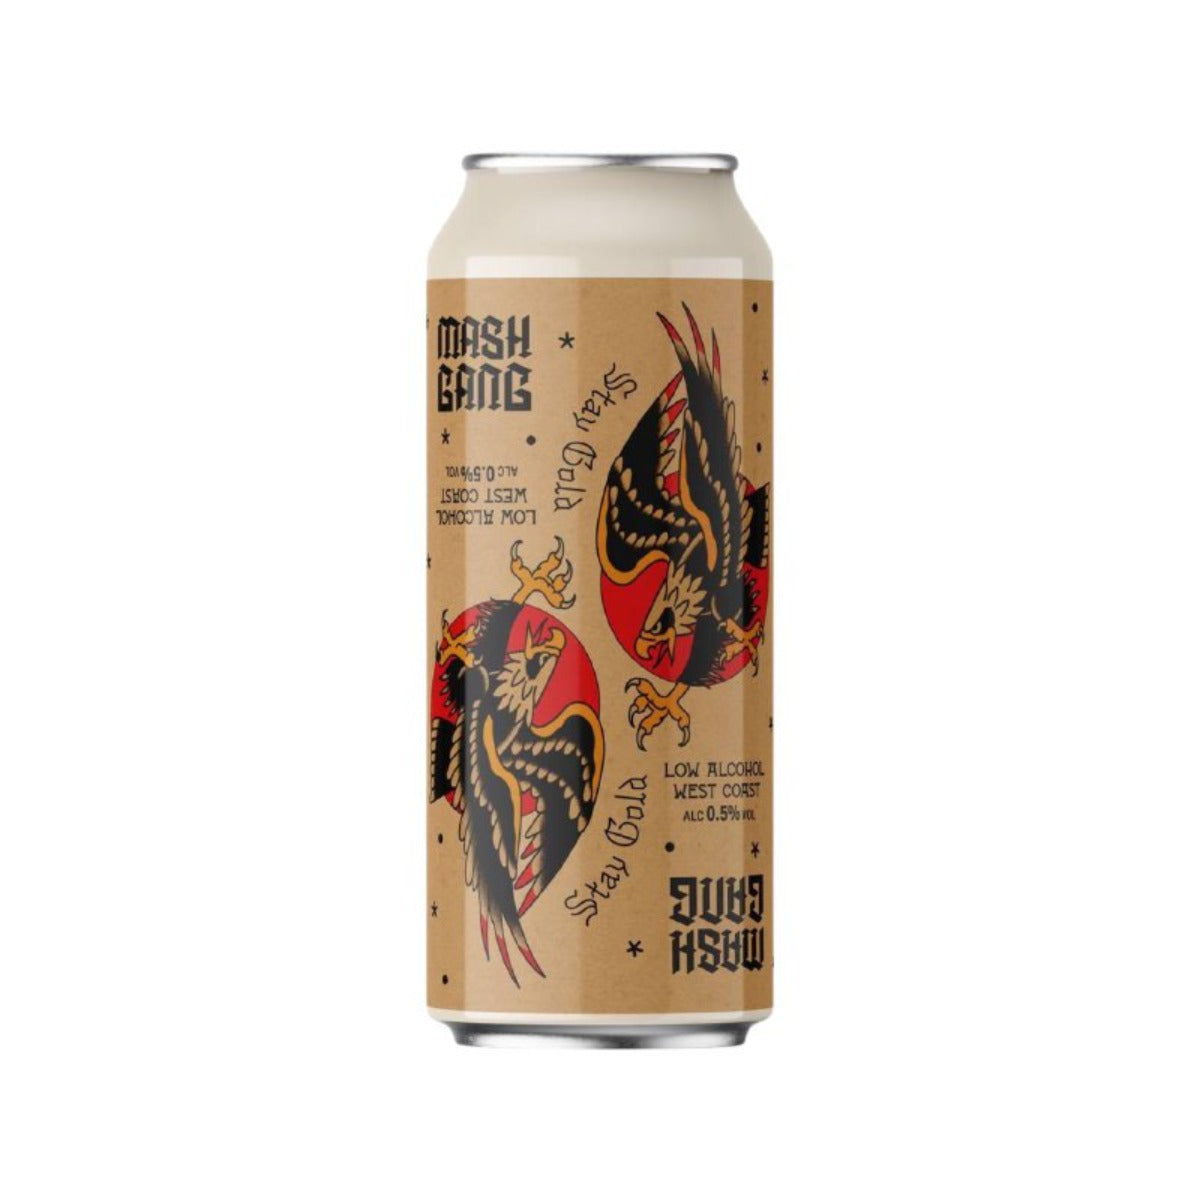 Stay Gold - 0.5% - West Coast Pale - 440ml - 12 Pack